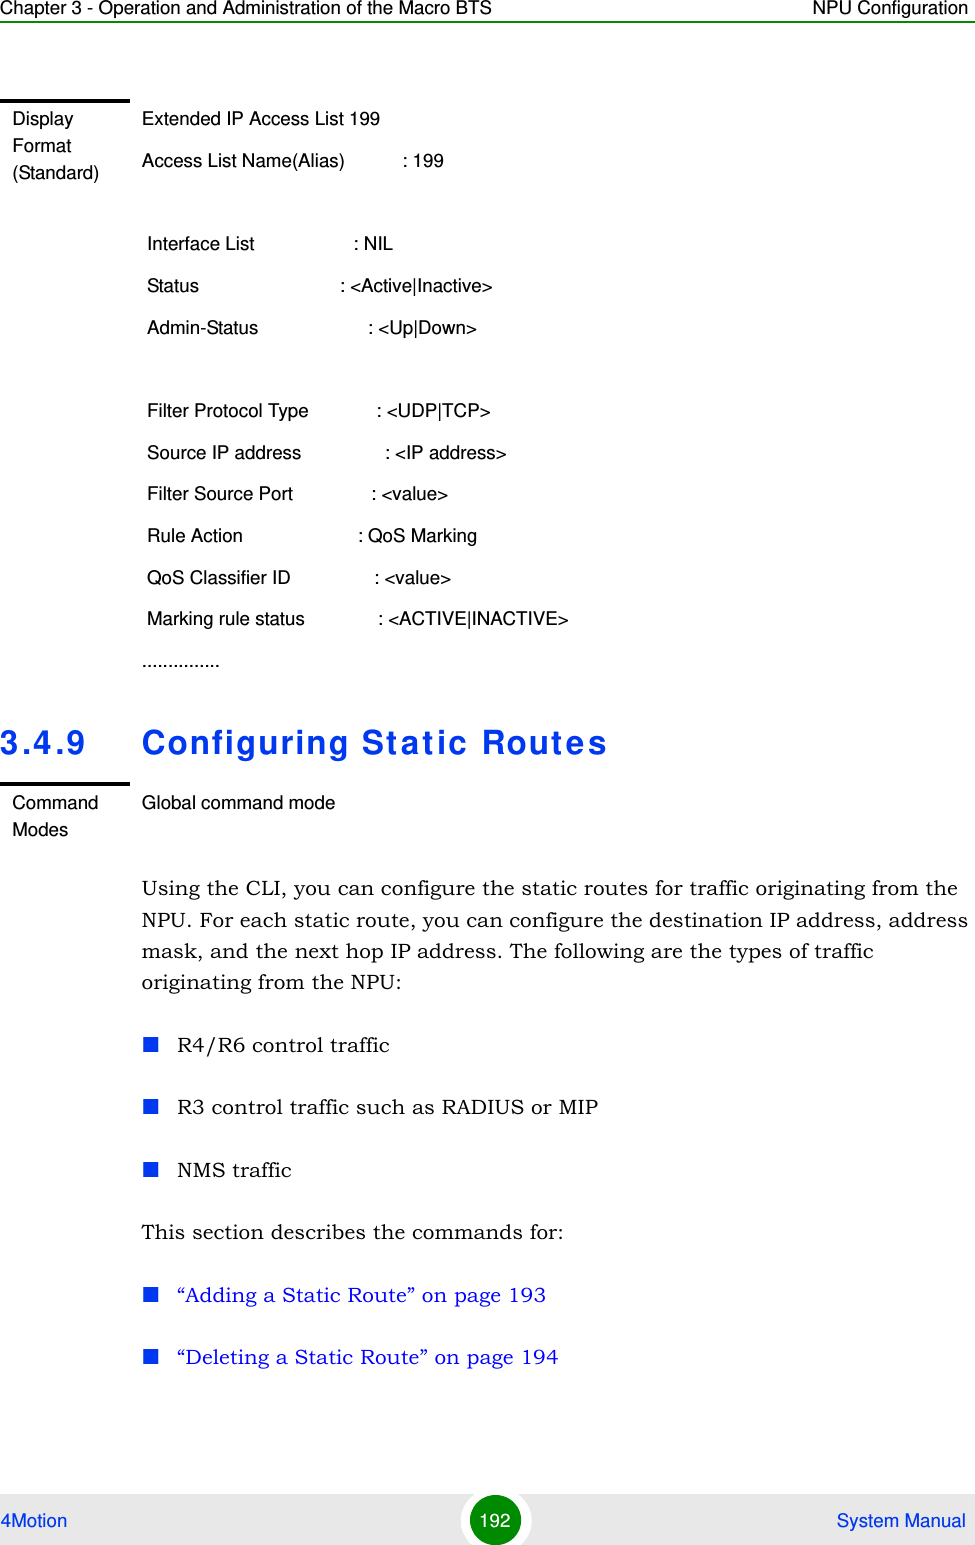 Chapter 3 - Operation and Administration of the Macro BTS NPU Configuration4Motion 192  System Manual3.4.9 Configuring Static RoutesUsing the CLI, you can configure the static routes for traffic originating from the NPU. For each static route, you can configure the destination IP address, address mask, and the next hop IP address. The following are the types of traffic originating from the NPU:R4/R6 control trafficR3 control traffic such as RADIUS or MIPNMS traffic This section describes the commands for:“Adding a Static Route” on page 193“Deleting a Static Route” on page 194Display Format (Standard)Extended IP Access List 199Access List Name(Alias)           : 199 Interface List                   : NIL Status                           : &lt;Active|Inactive&gt; Admin-Status                     : &lt;Up|Down&gt; Filter Protocol Type             : &lt;UDP|TCP&gt; Source IP address                : &lt;IP address&gt; Filter Source Port               : &lt;value&gt; Rule Action                      : QoS Marking QoS Classifier ID                : &lt;value&gt; Marking rule status              : &lt;ACTIVE|INACTIVE&gt;...............Command ModesGlobal command mode